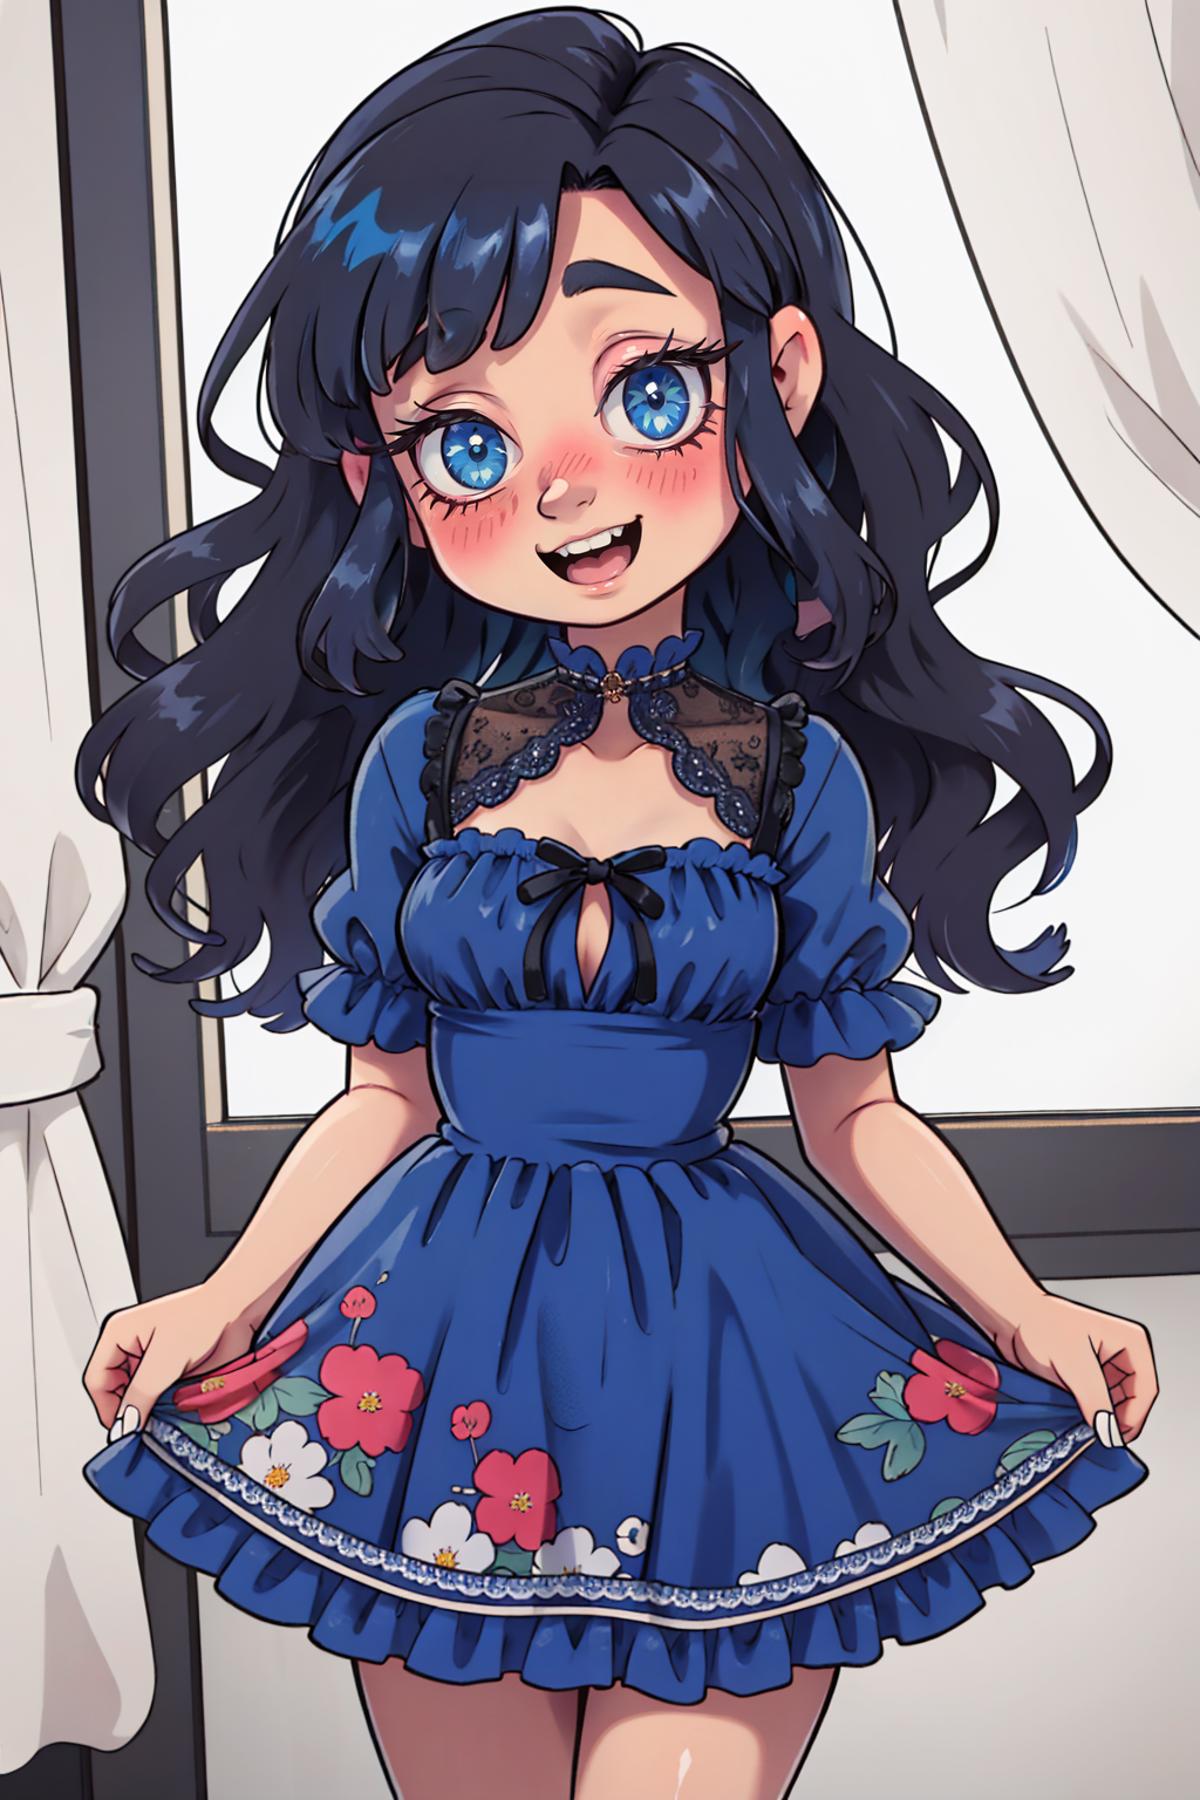 A cartoon character in a blue dress with flowers on it.